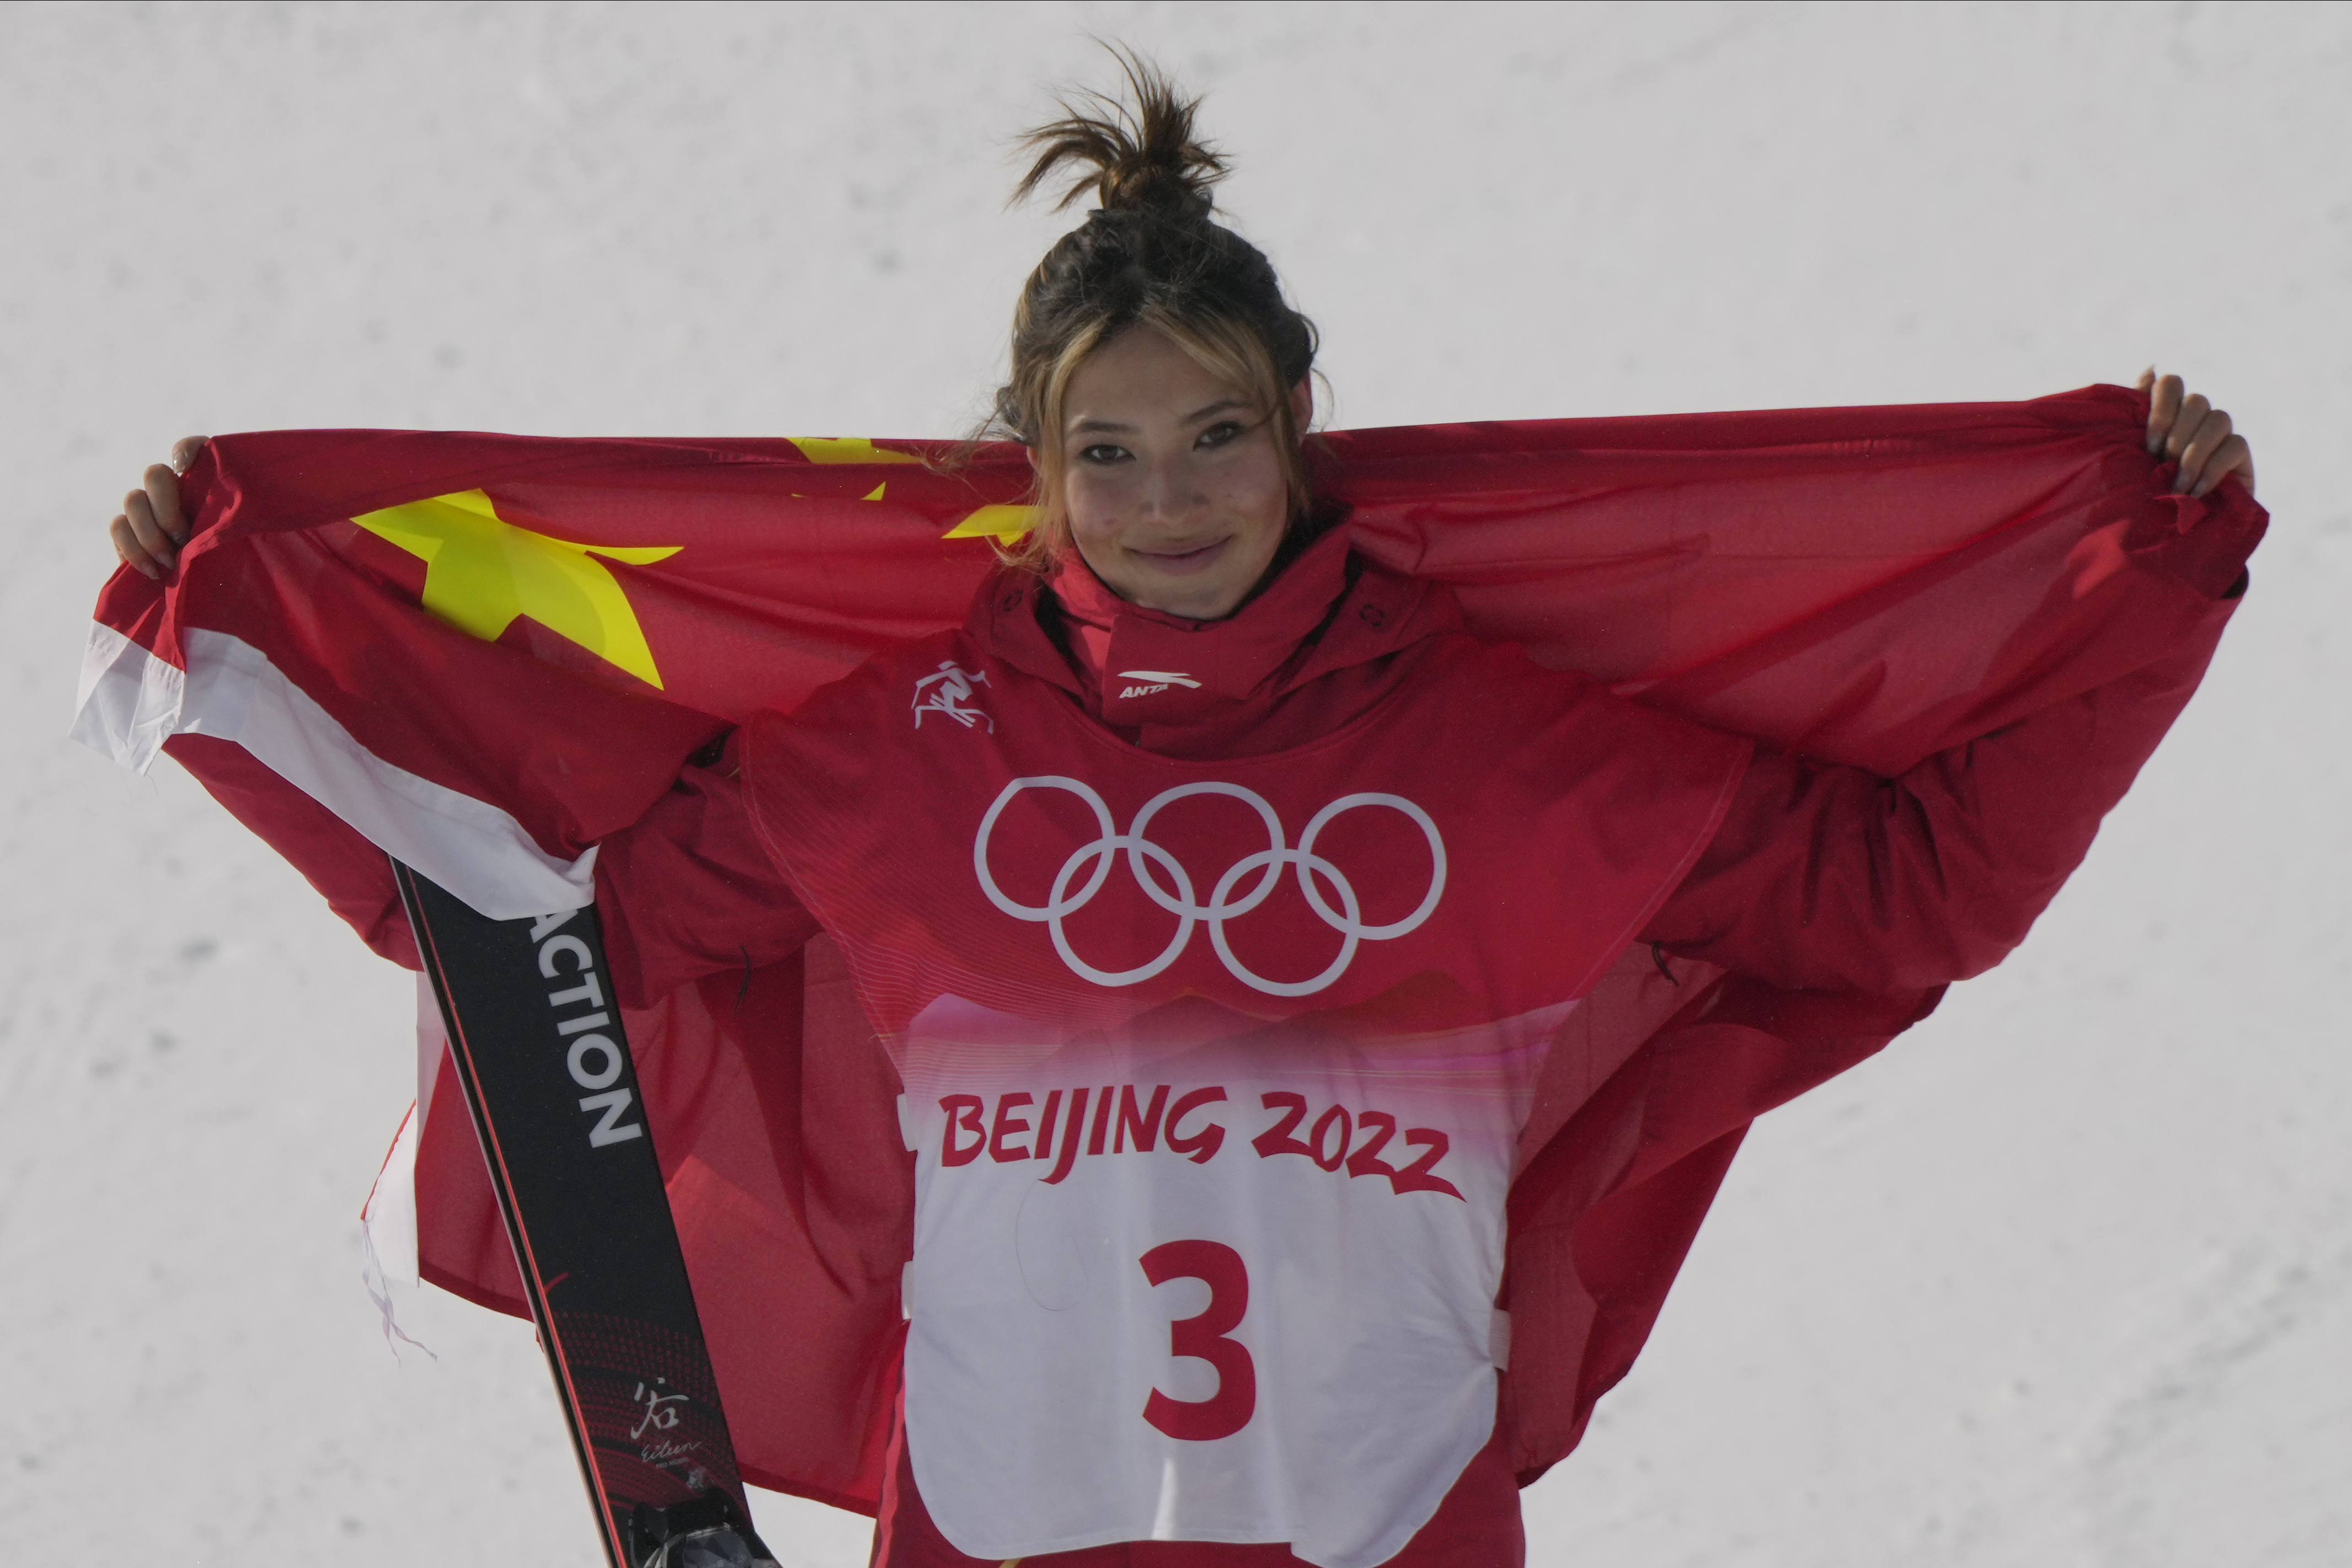 Who is Eileen Gu? Meet the freestyle skier and model whose Winter